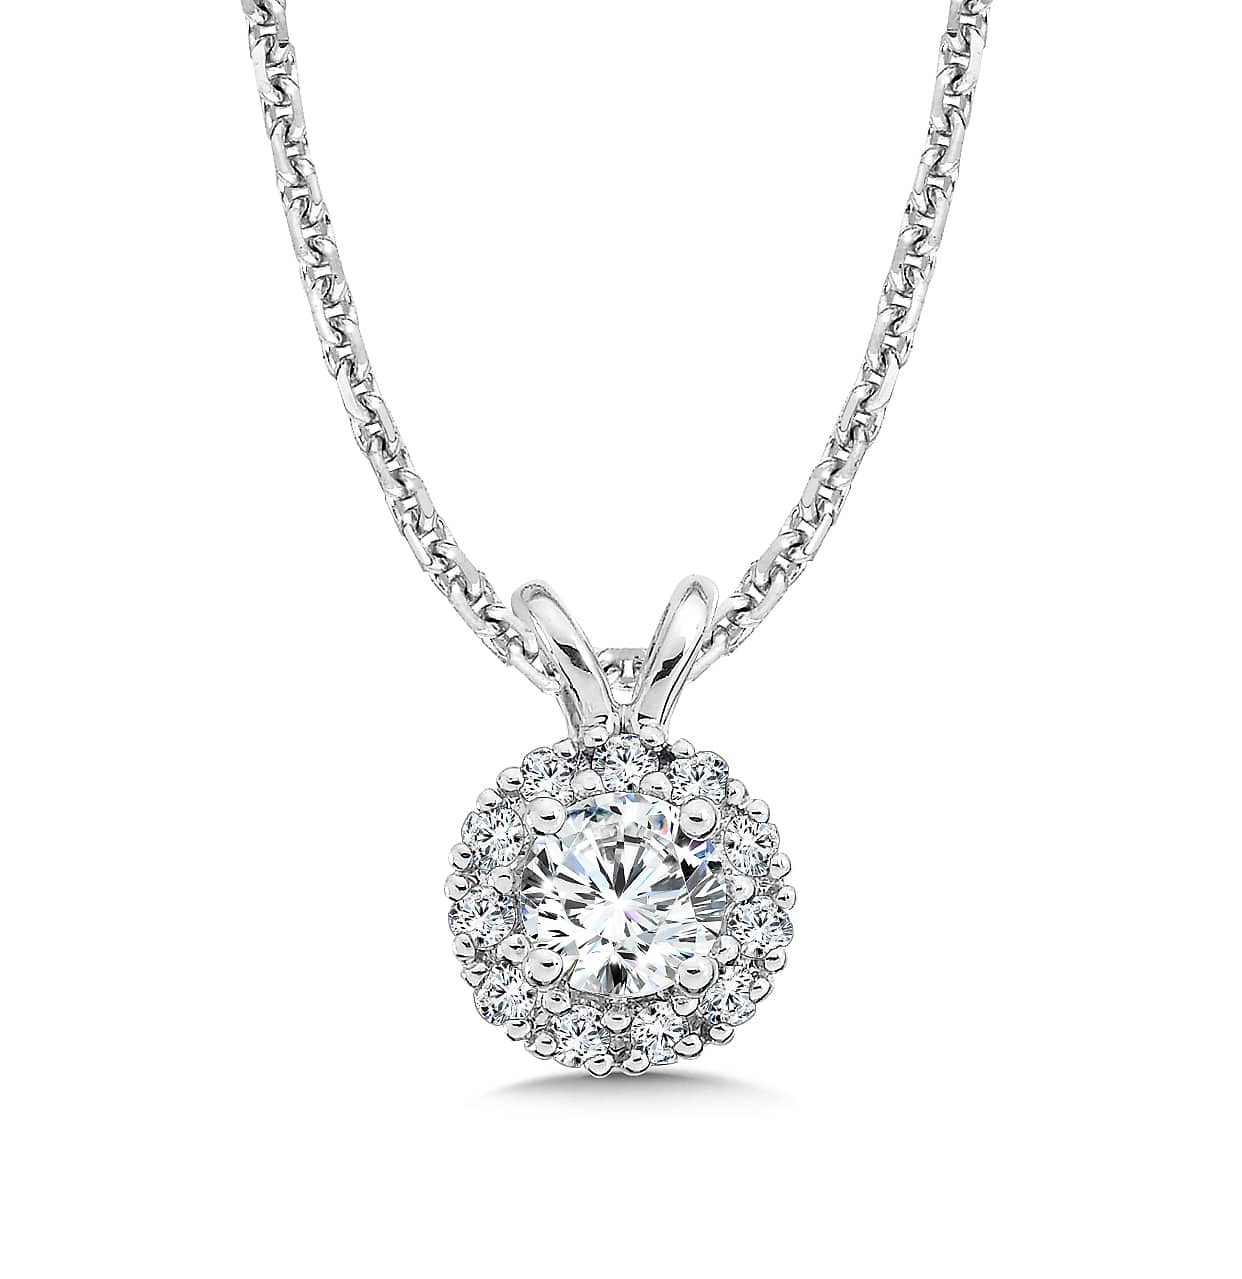 Buy Statement Diamond Halo Necklace W/ 8 Stationary Diamond Cushion Cut Halo  Necklace Gift for Her Silver Diamond Necklacebn1602 Online in India - Etsy